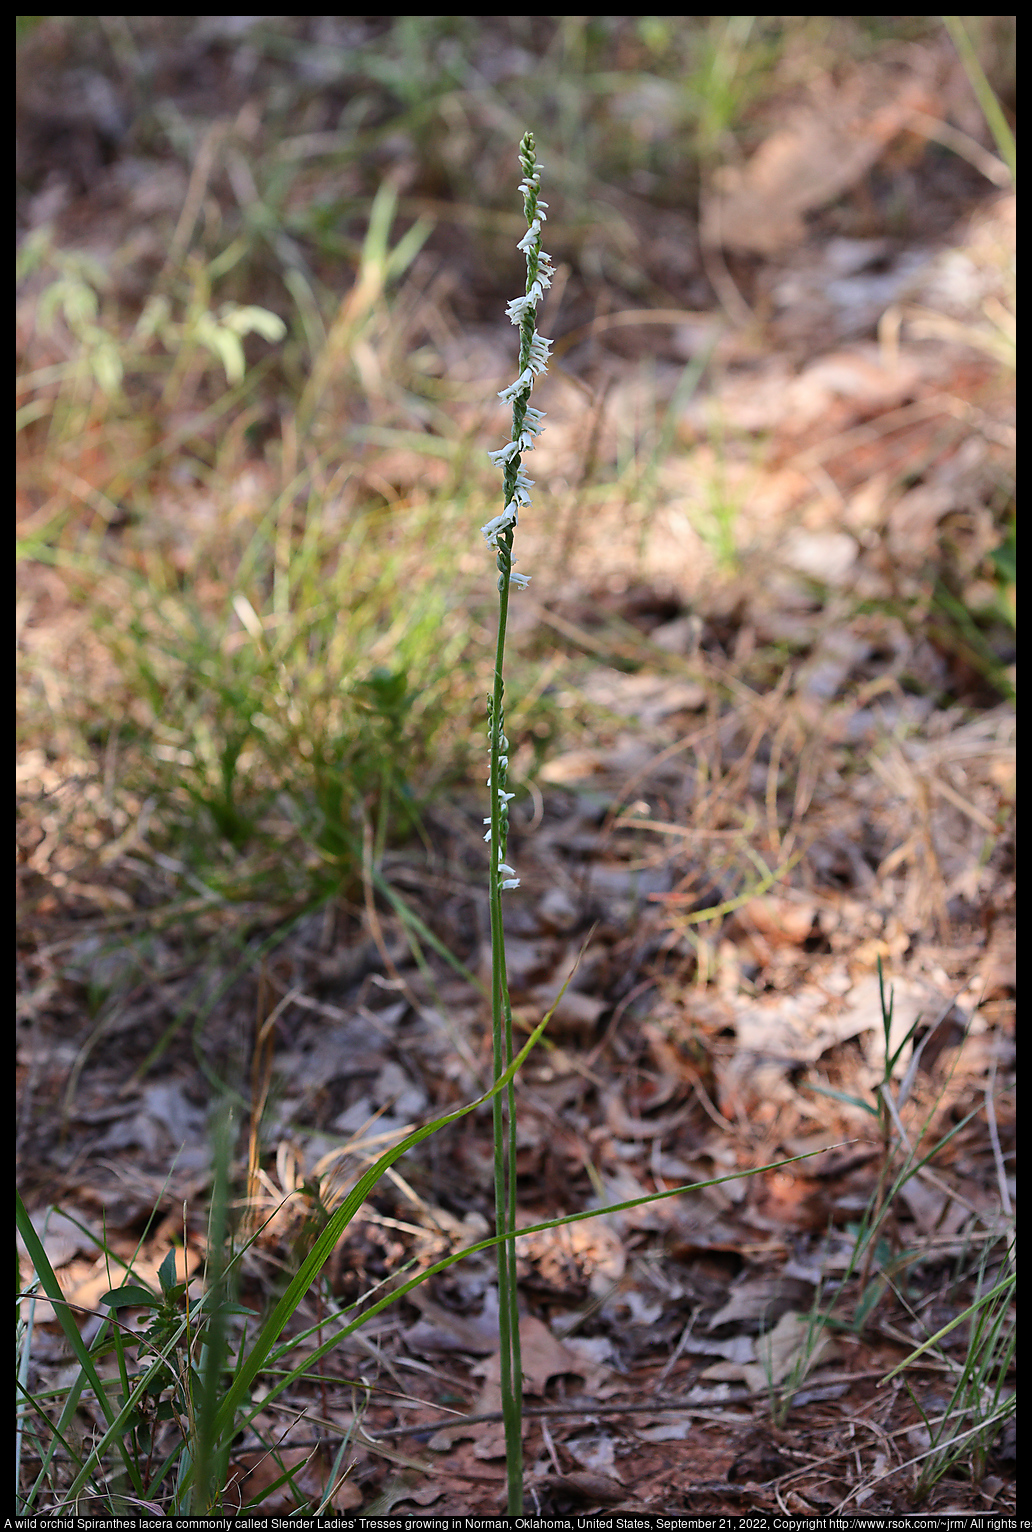 A wild orchid Spiranthes lacera commonly called Slender Ladies' Tresses growing in Norman, Oklahoma, United States, September 21, 2022